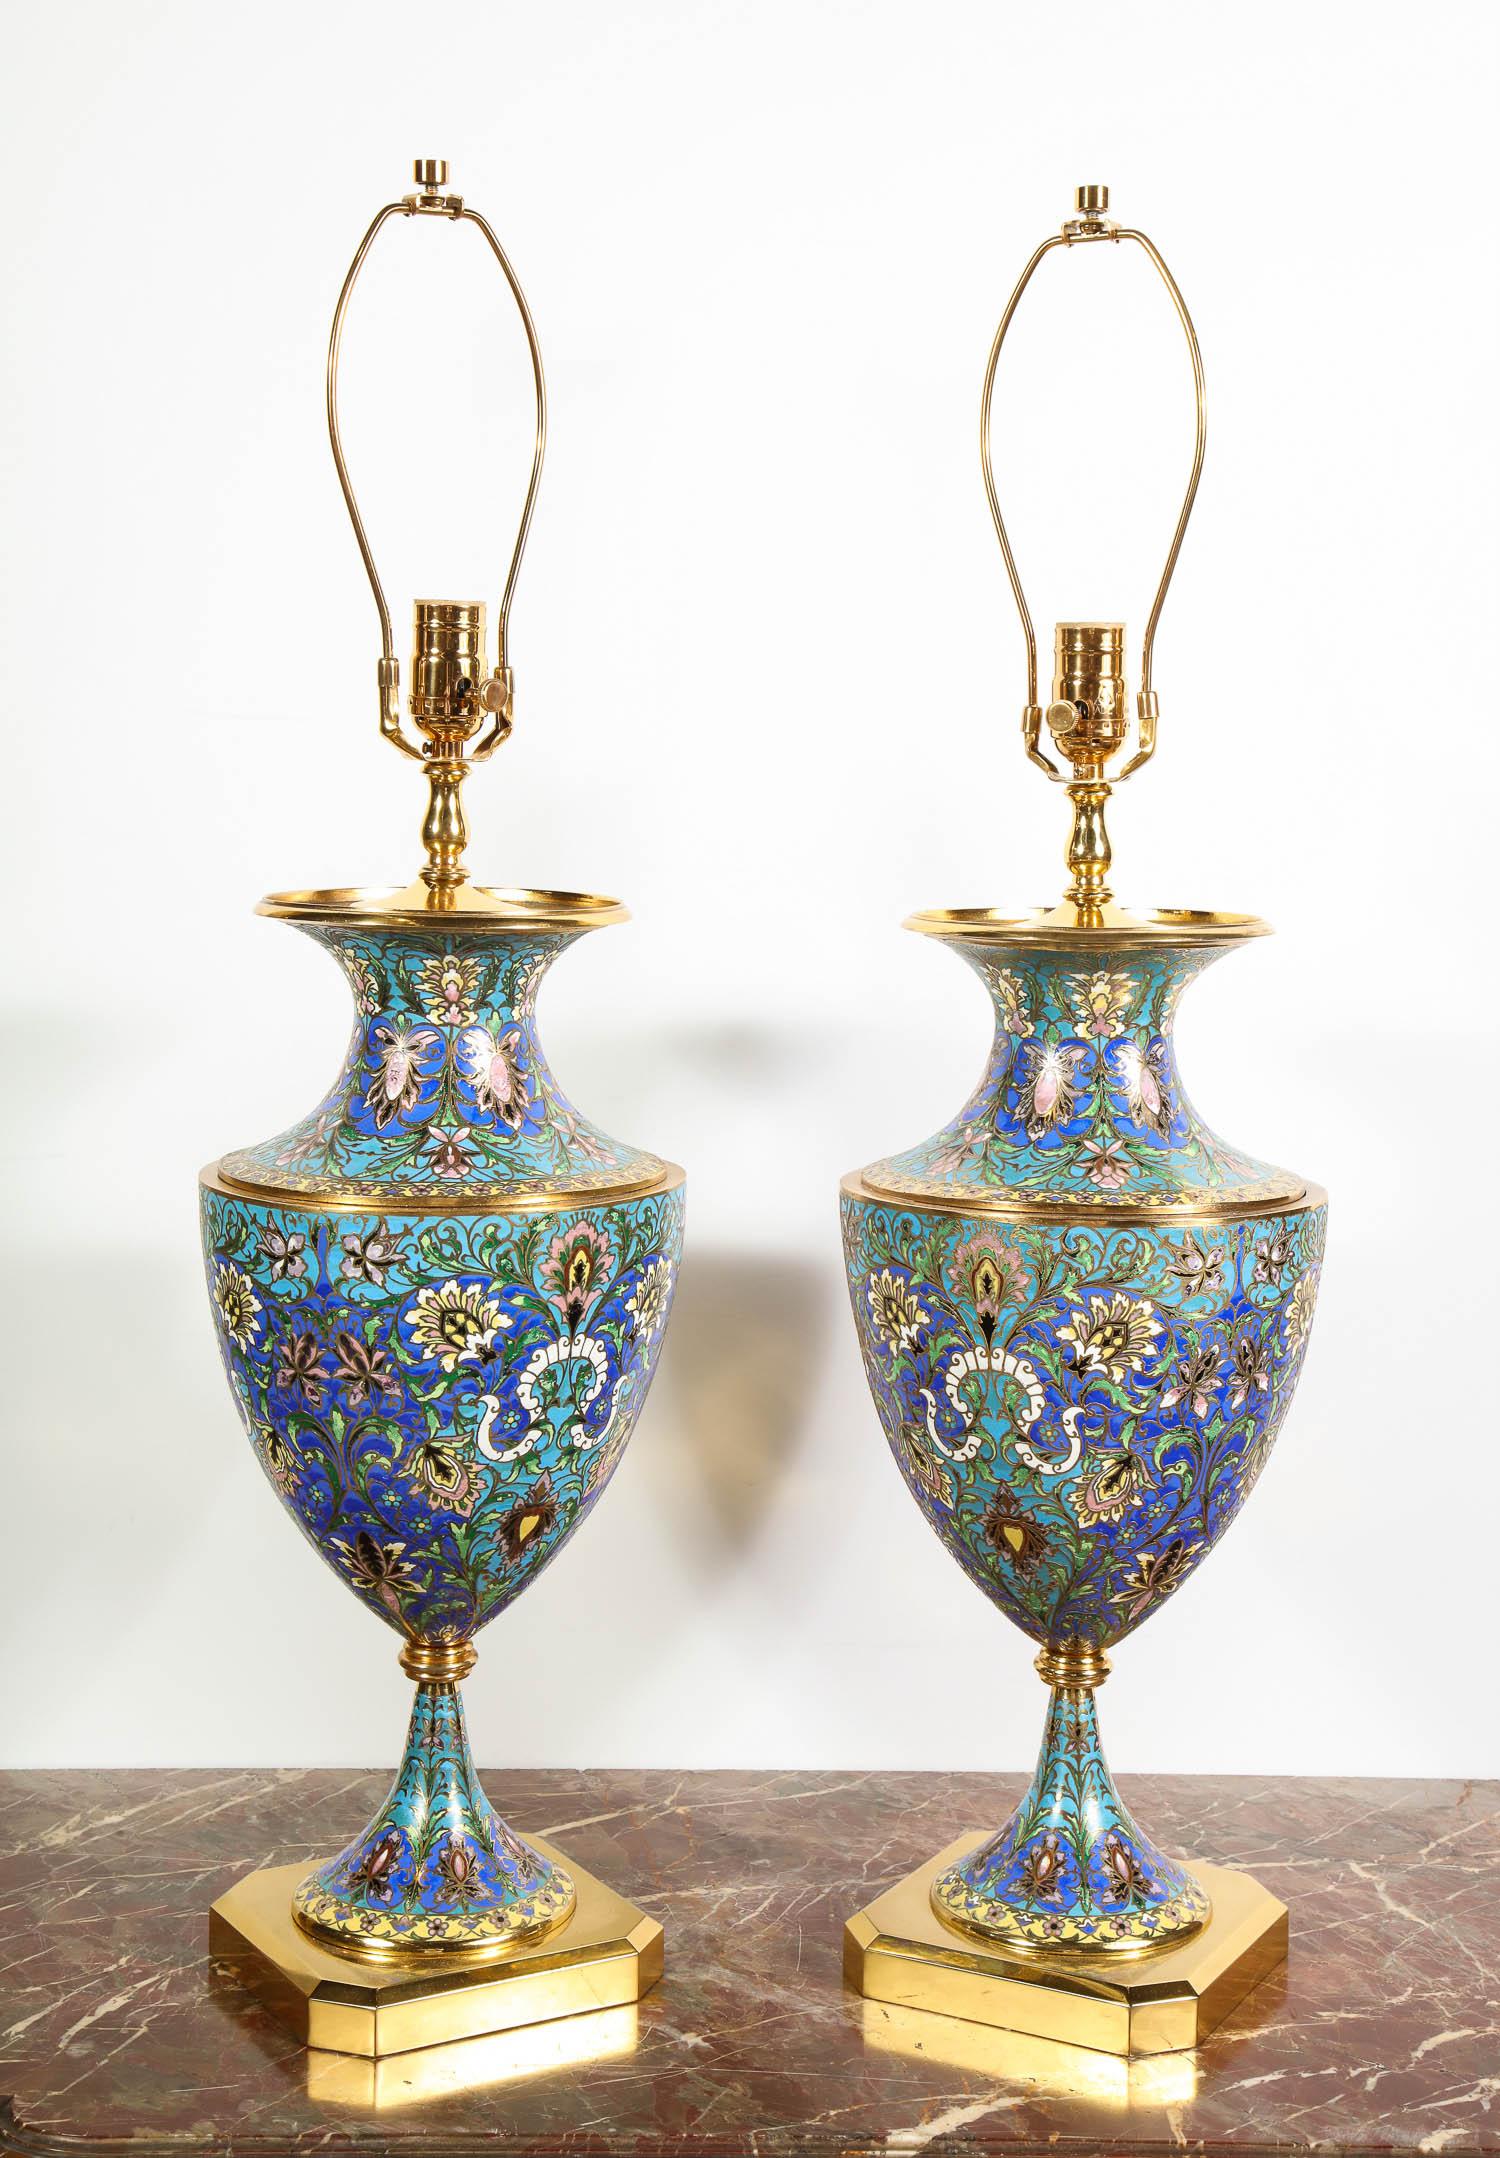 A large pair of French gilt bronze-mounted Champlevé / Cloisonné enamel table lamps,
circa 1910

Nicely enameled throughout. Can be used as lamps or vases. 

Good condition.

Overall - 32